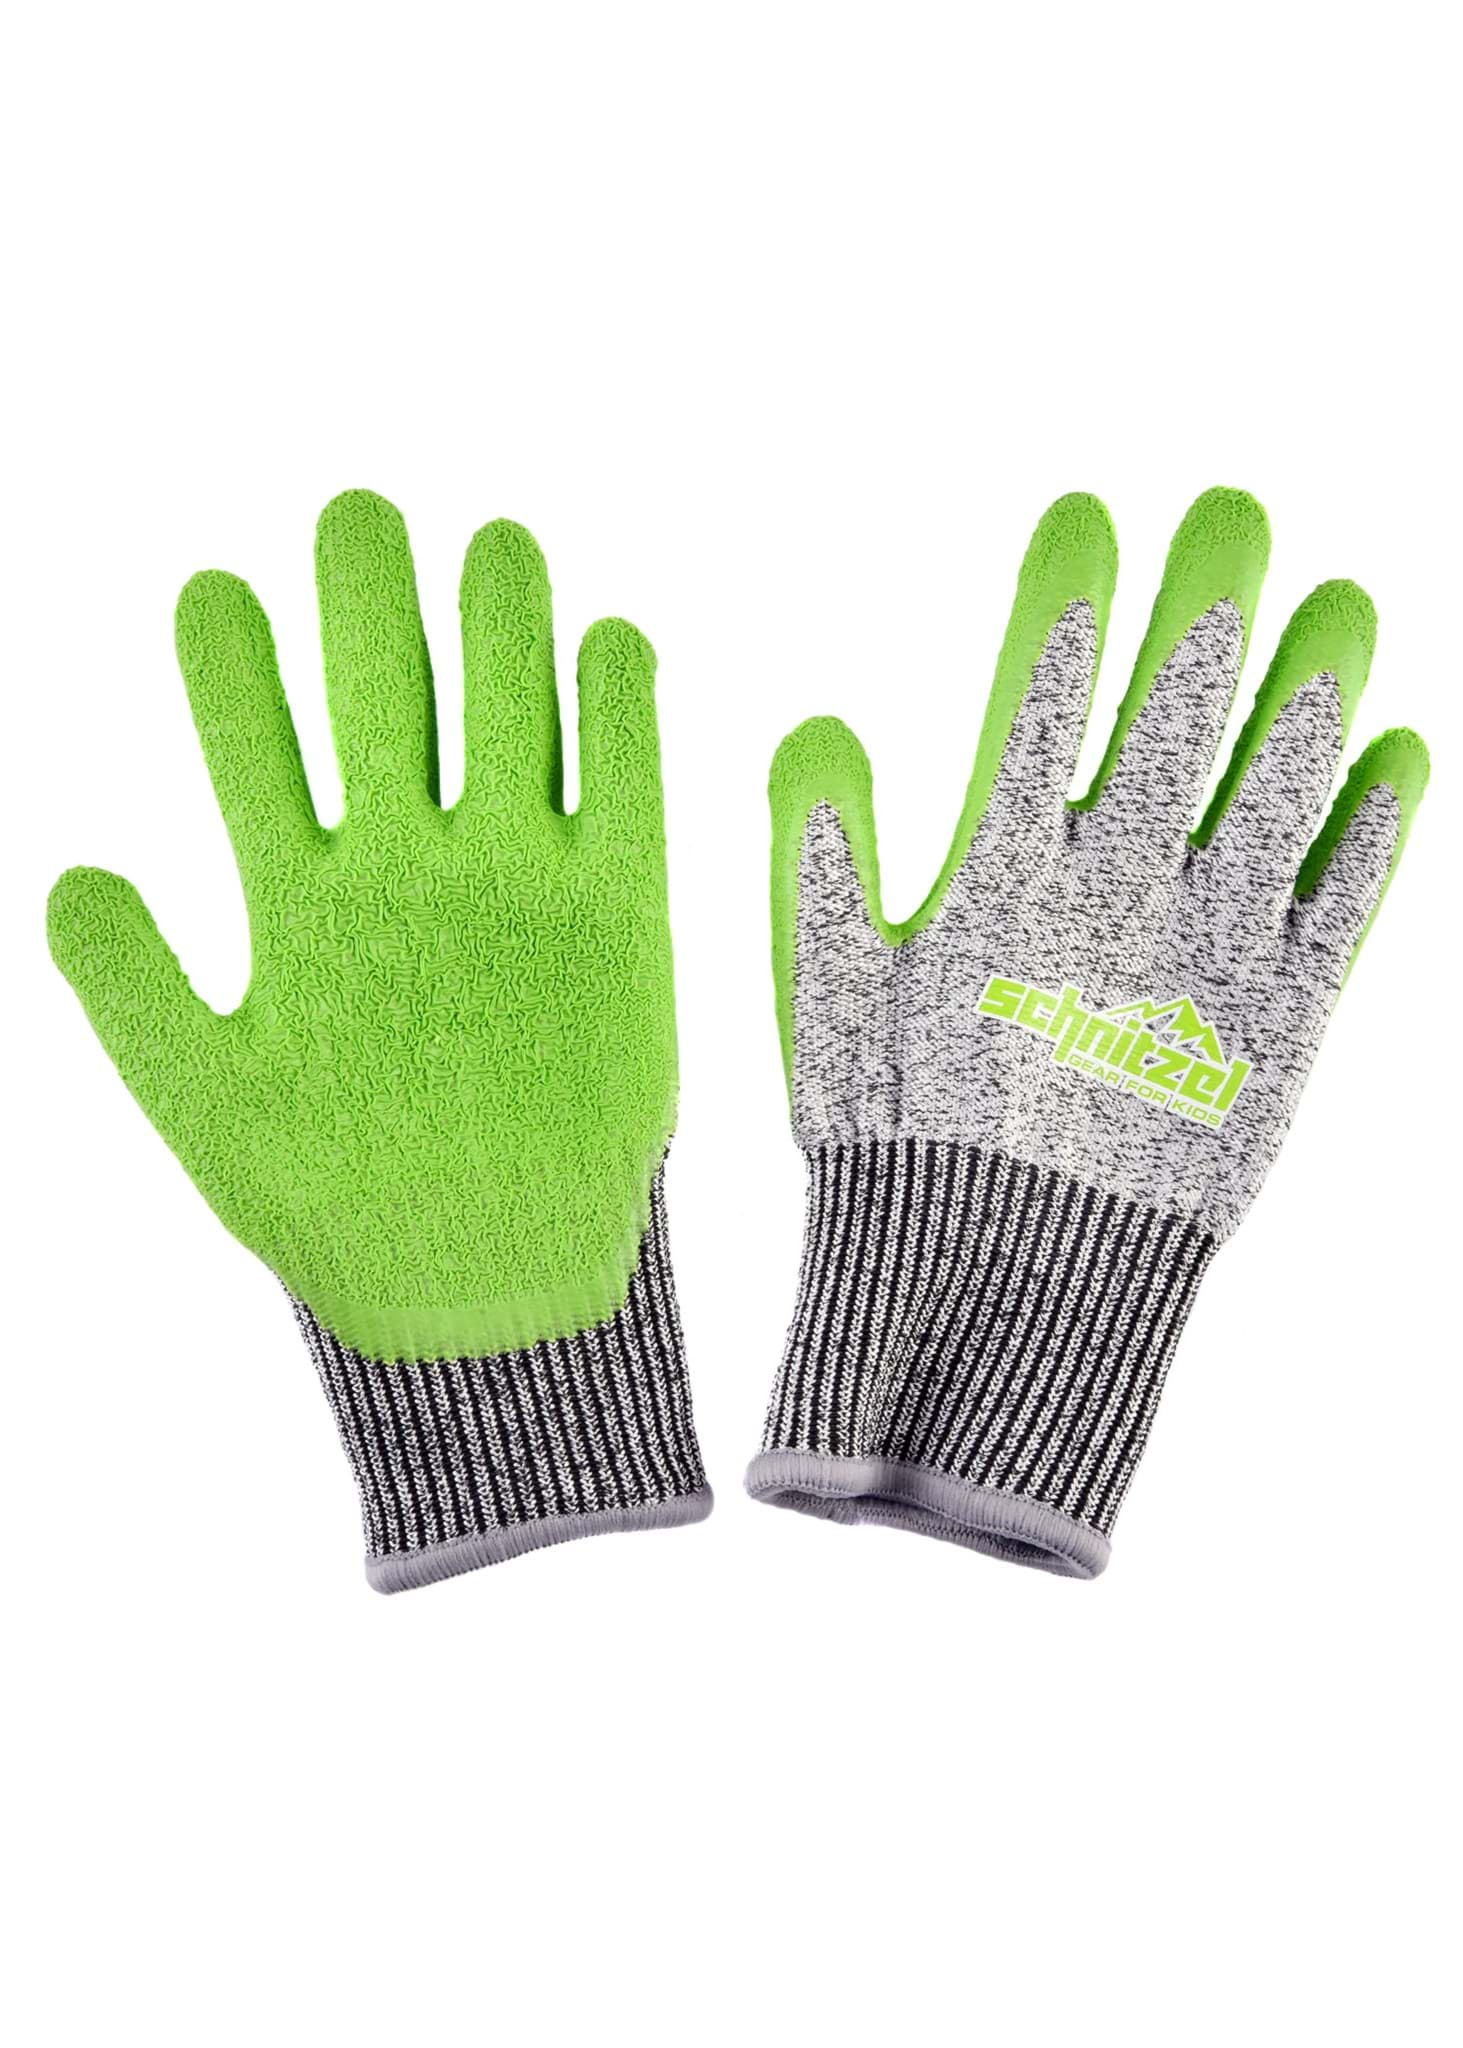 Picture of Schnitzel - Protekto Cut Protection Gloves for Kids Size 4